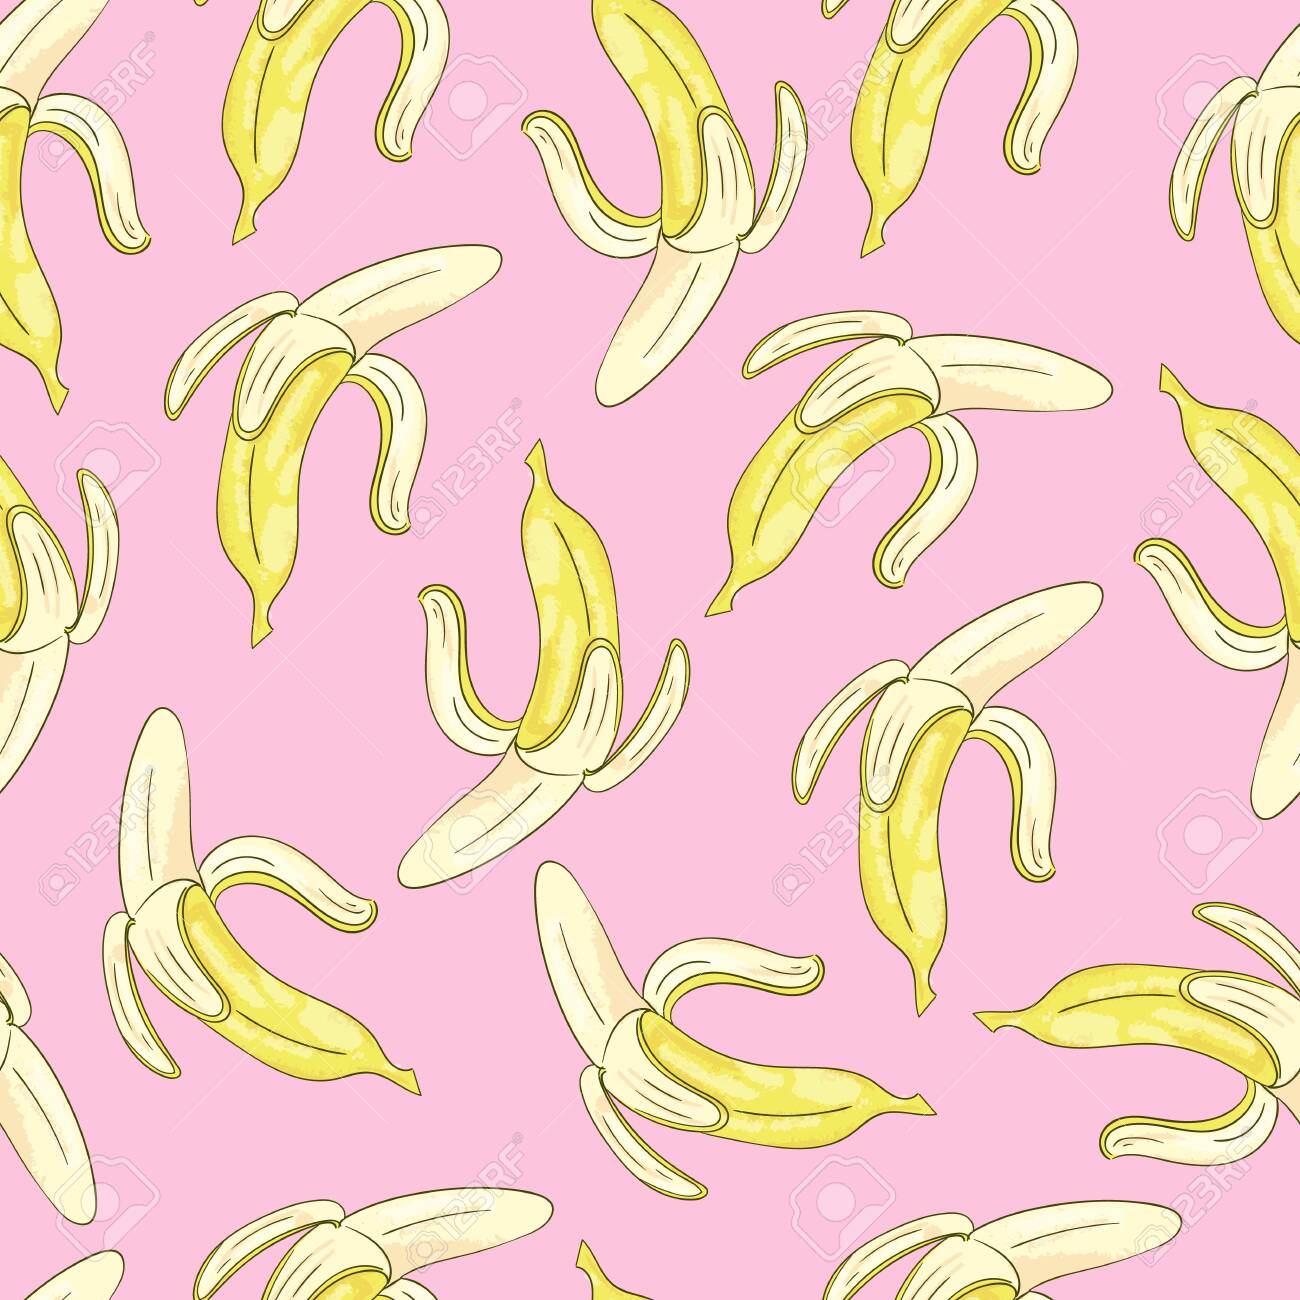 Seamless Background With Yellow Bananas On Pink Royalty Free